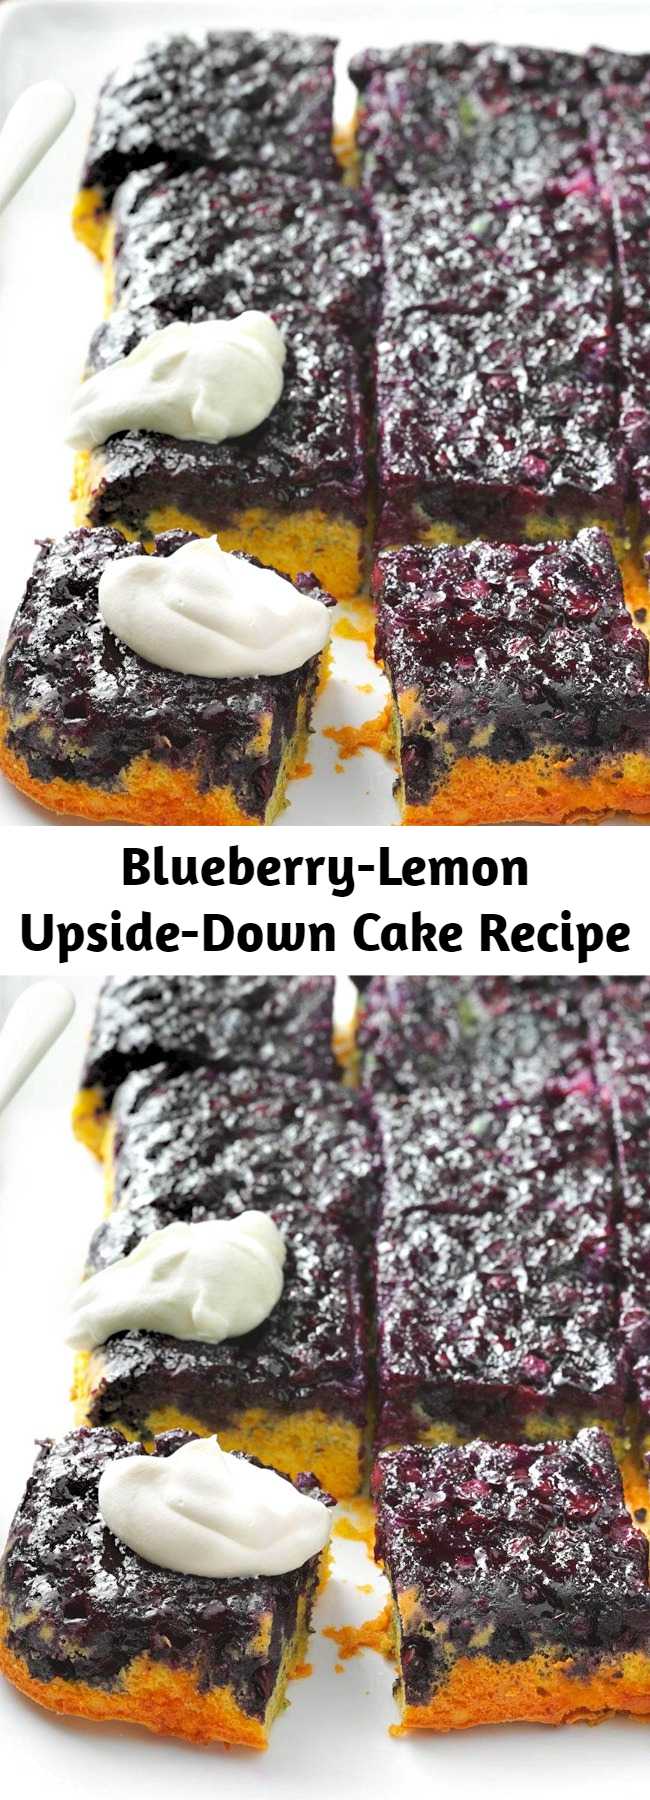 Blueberry-Lemon Upside-Down Cake Recipe - We love a good upside-down cake, and this our favorite one yet. The blueberries get super-juicy as they bake—it's the perfect representation of spring!